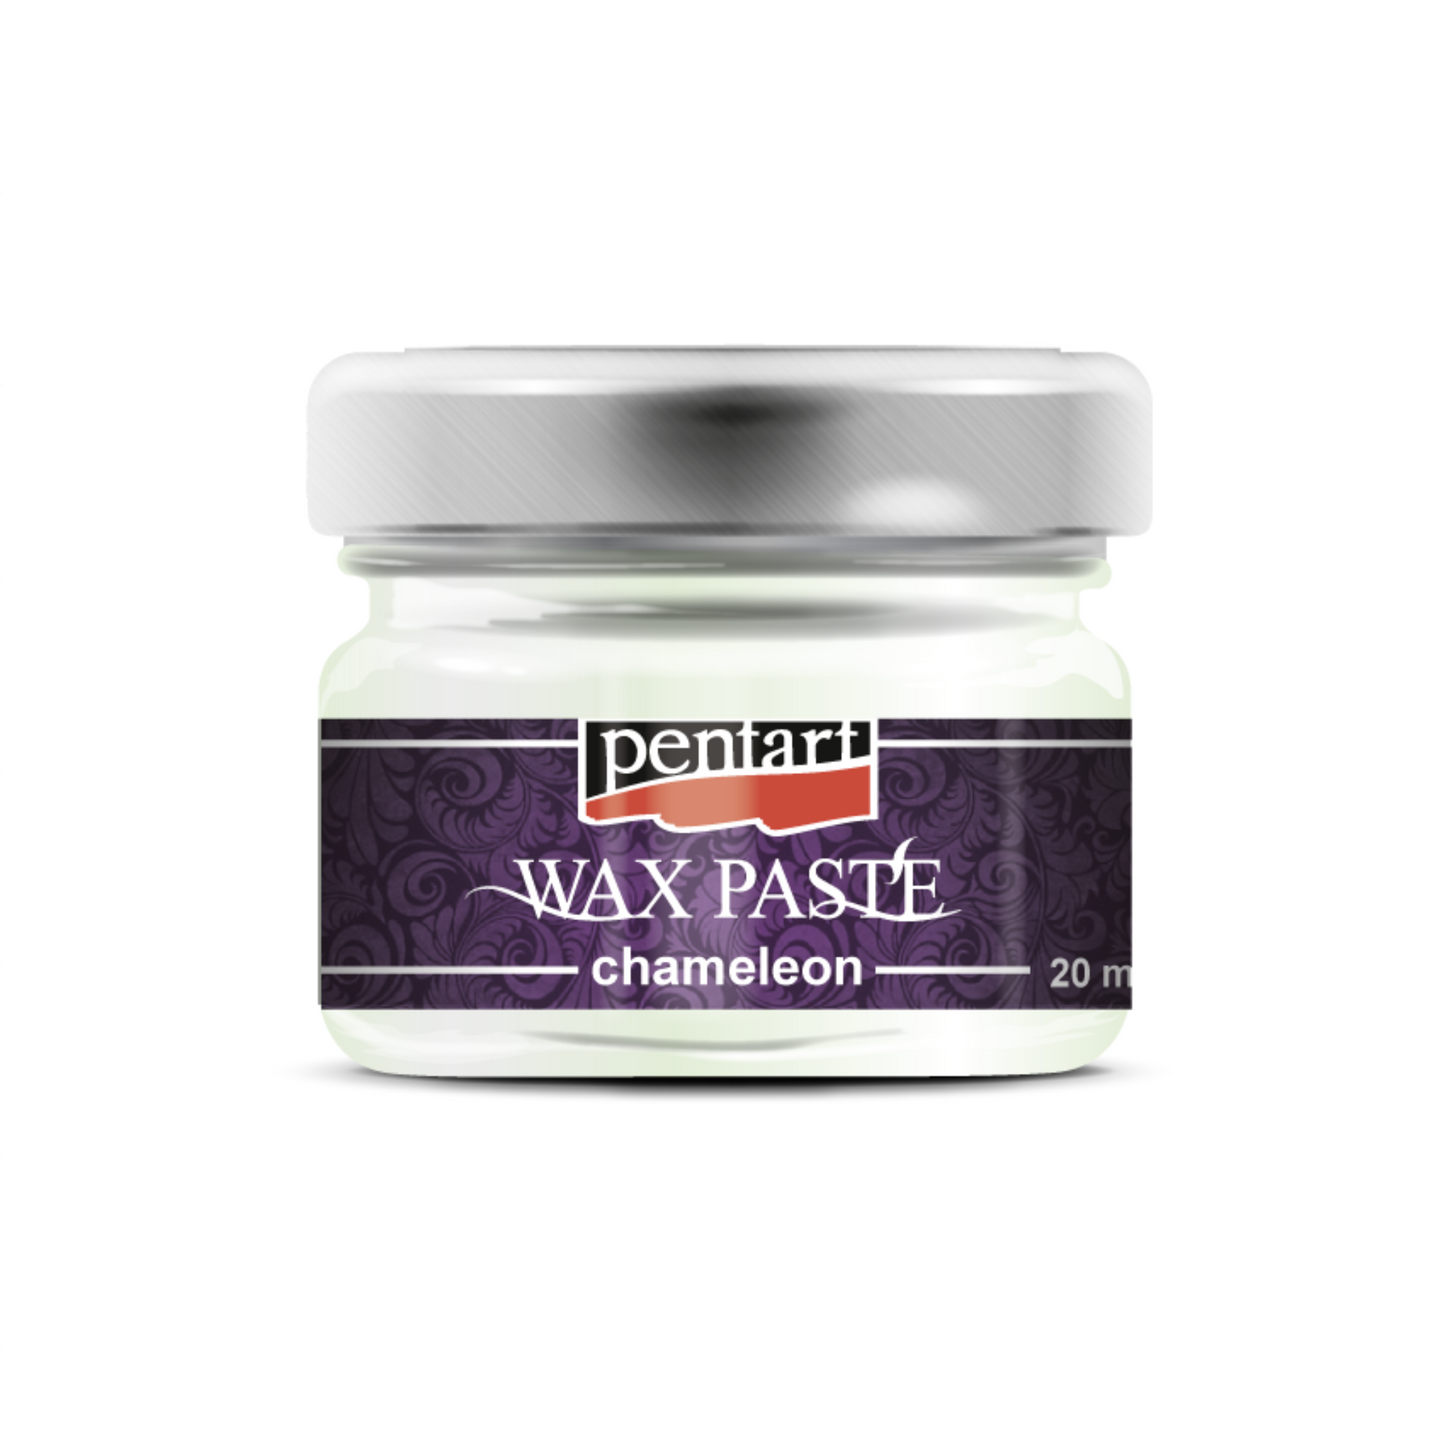 Wax Paste - Chameleon - Green by Pentart available at Milton's Daughter